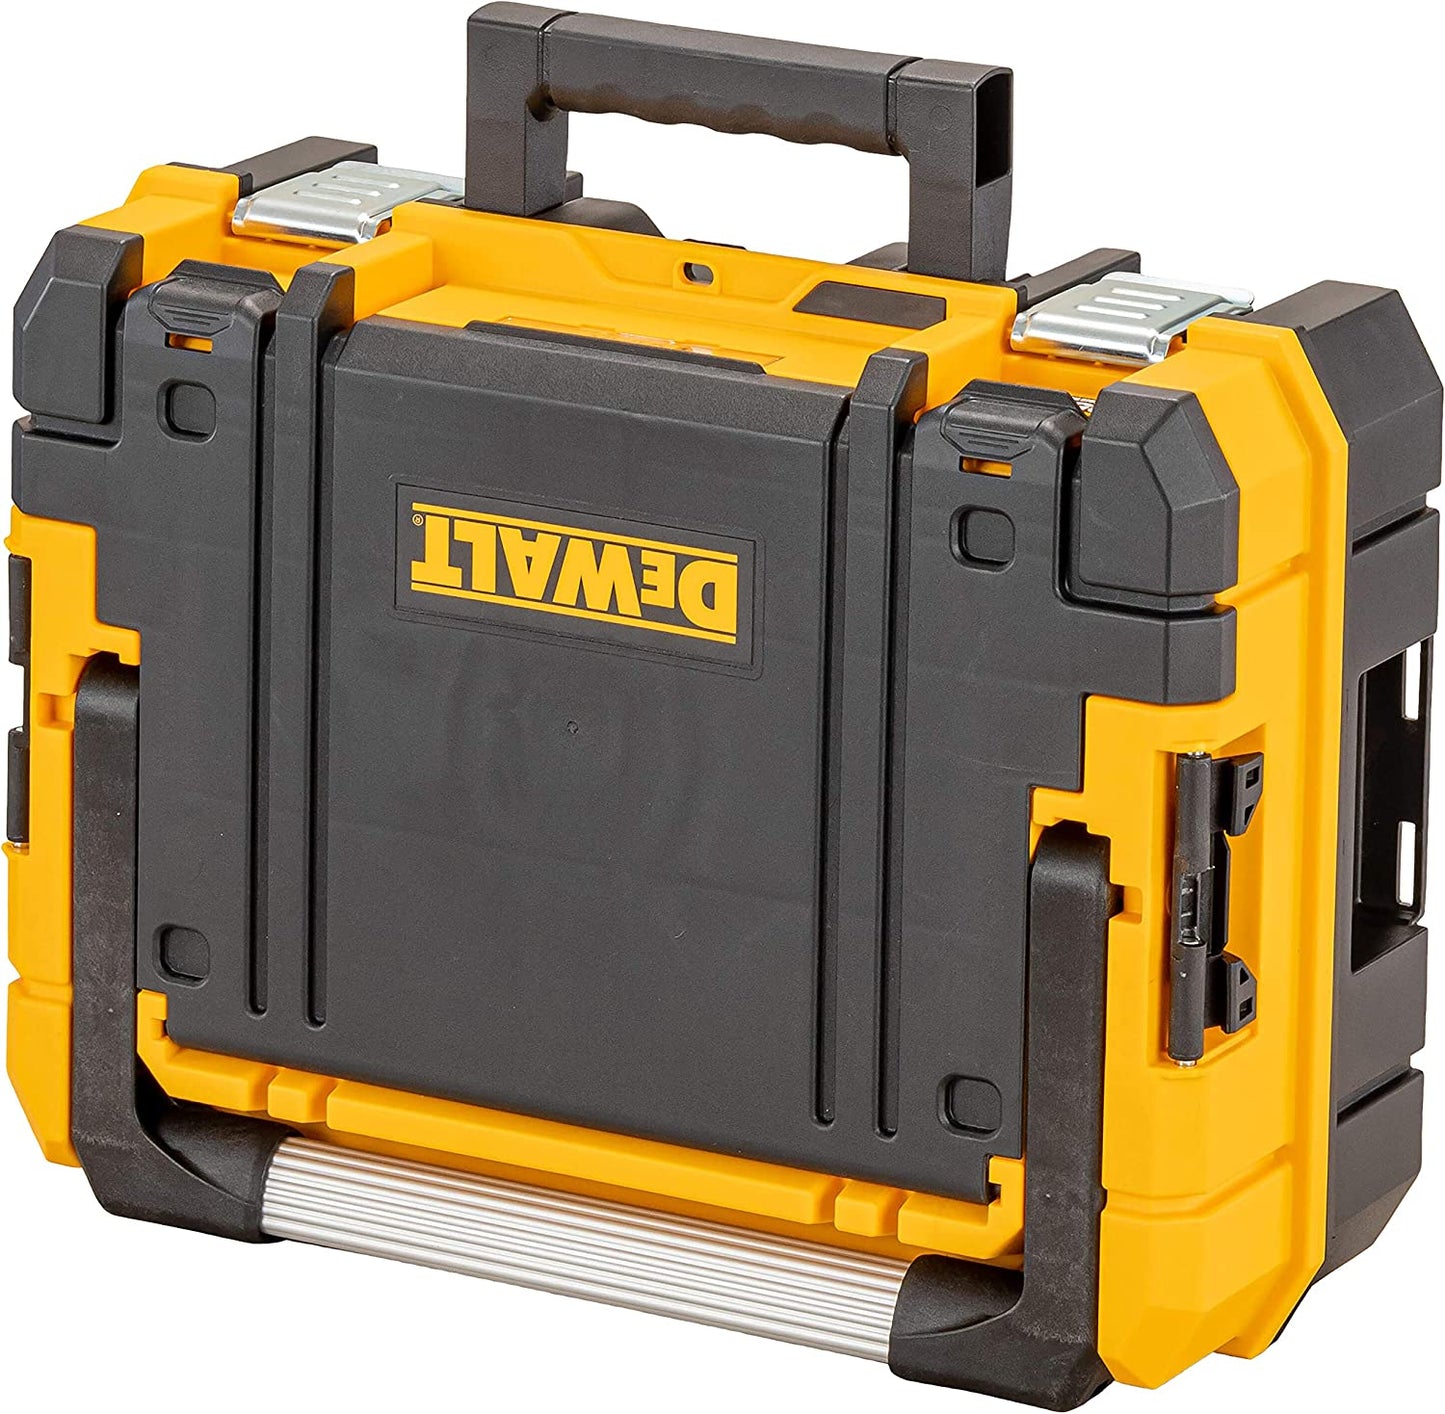 Dewalt DWST83344-1 Tool Box I (27L Volume, Compact Foam Insert, Can Be Combined With Other TSTAK Boxes, Safe Storage Of Power Tools And Hand Tools, IP54)